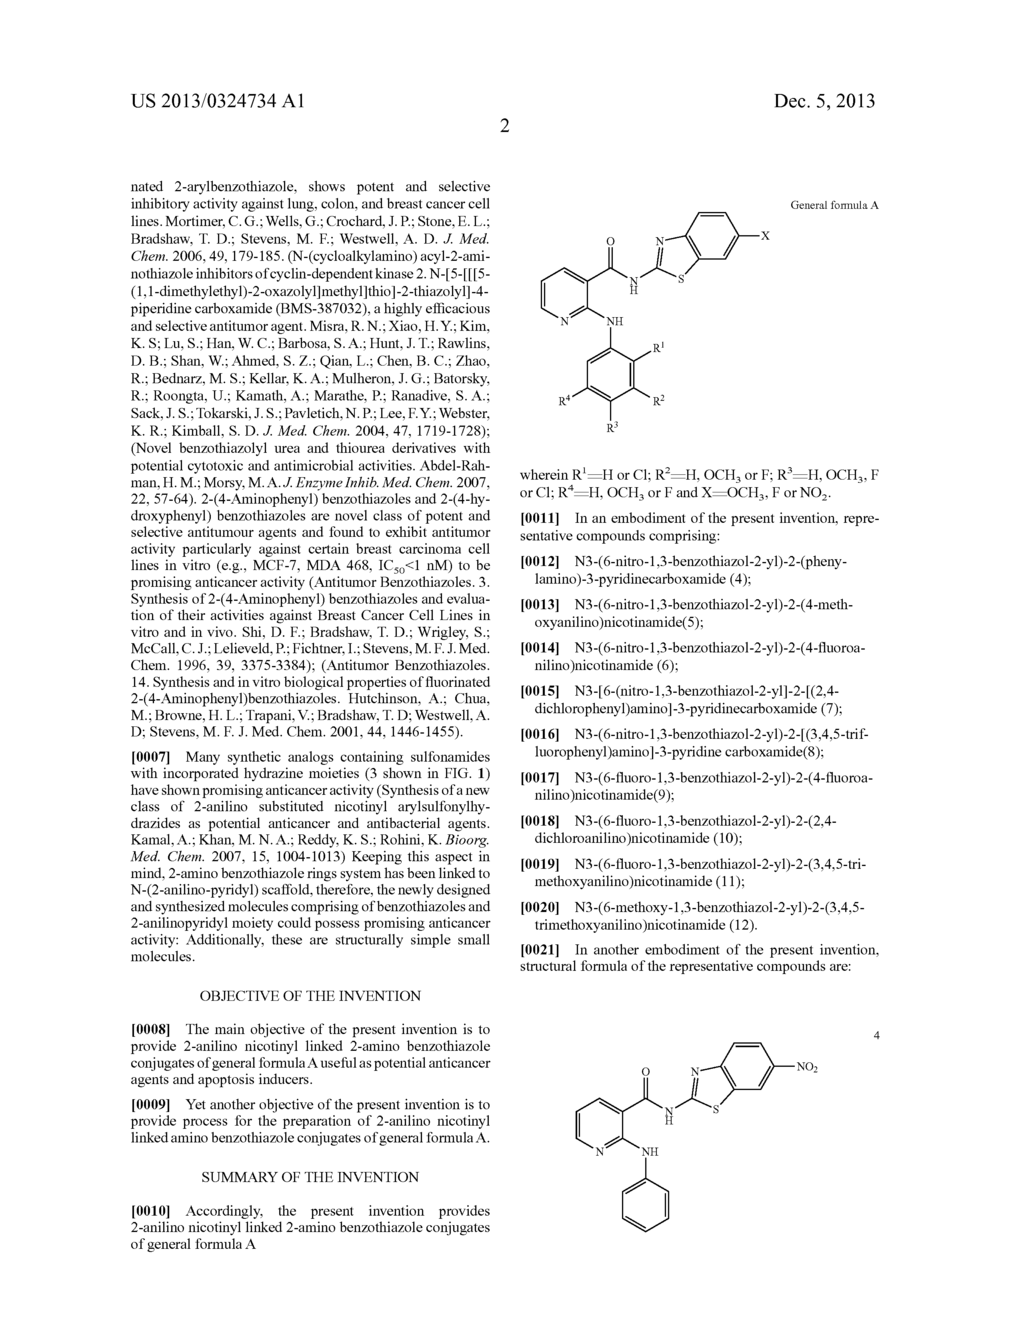 2-ANILINO NICOTINYL LINKED 2-AMINO BENZOTHIAZOLE CONJUGATES AND PROCESS     FOR THE PREPARATION THEREOF - diagram, schematic, and image 17